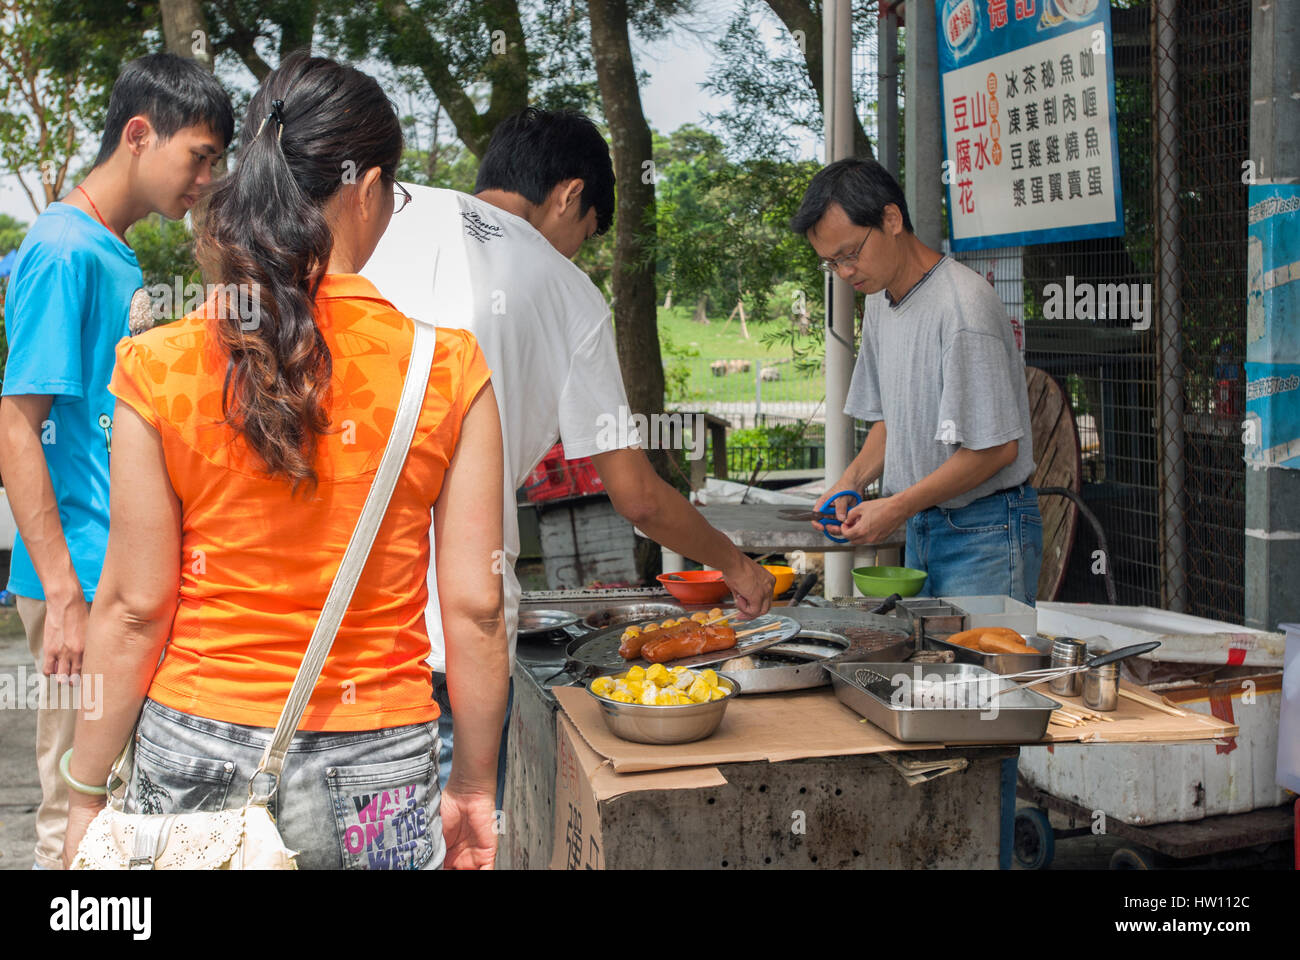 Restaurant in Ngong Ping Plateau providing outdoor barbecue to customers, Lantau Island. Stock Photo